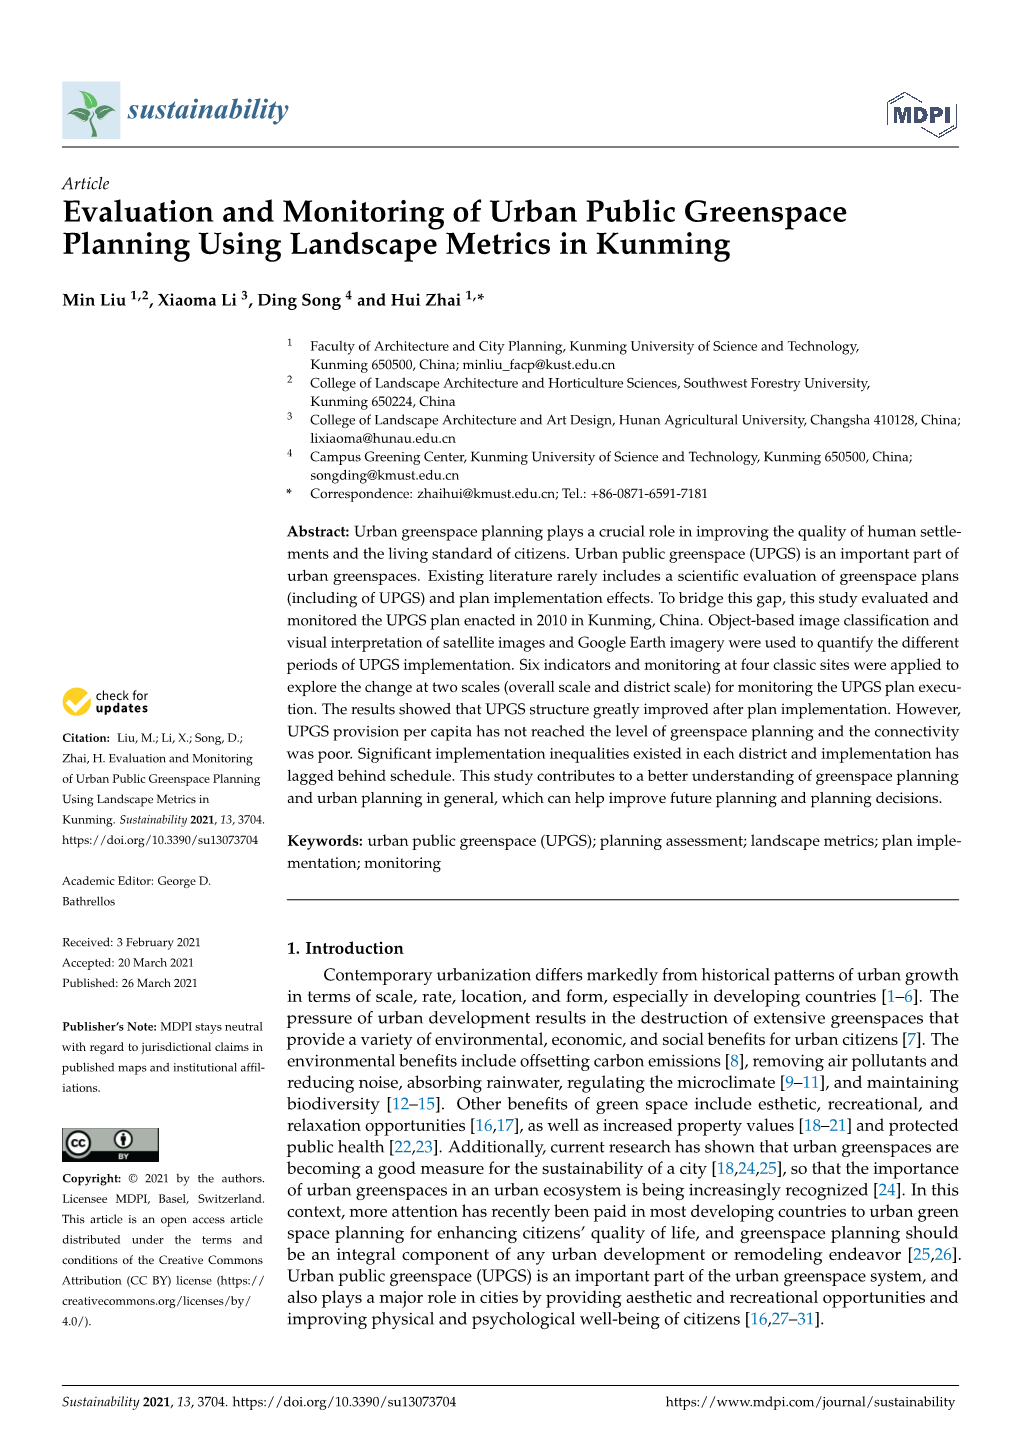 Evaluation and Monitoring of Urban Public Greenspace Planning Using Landscape Metrics in Kunming